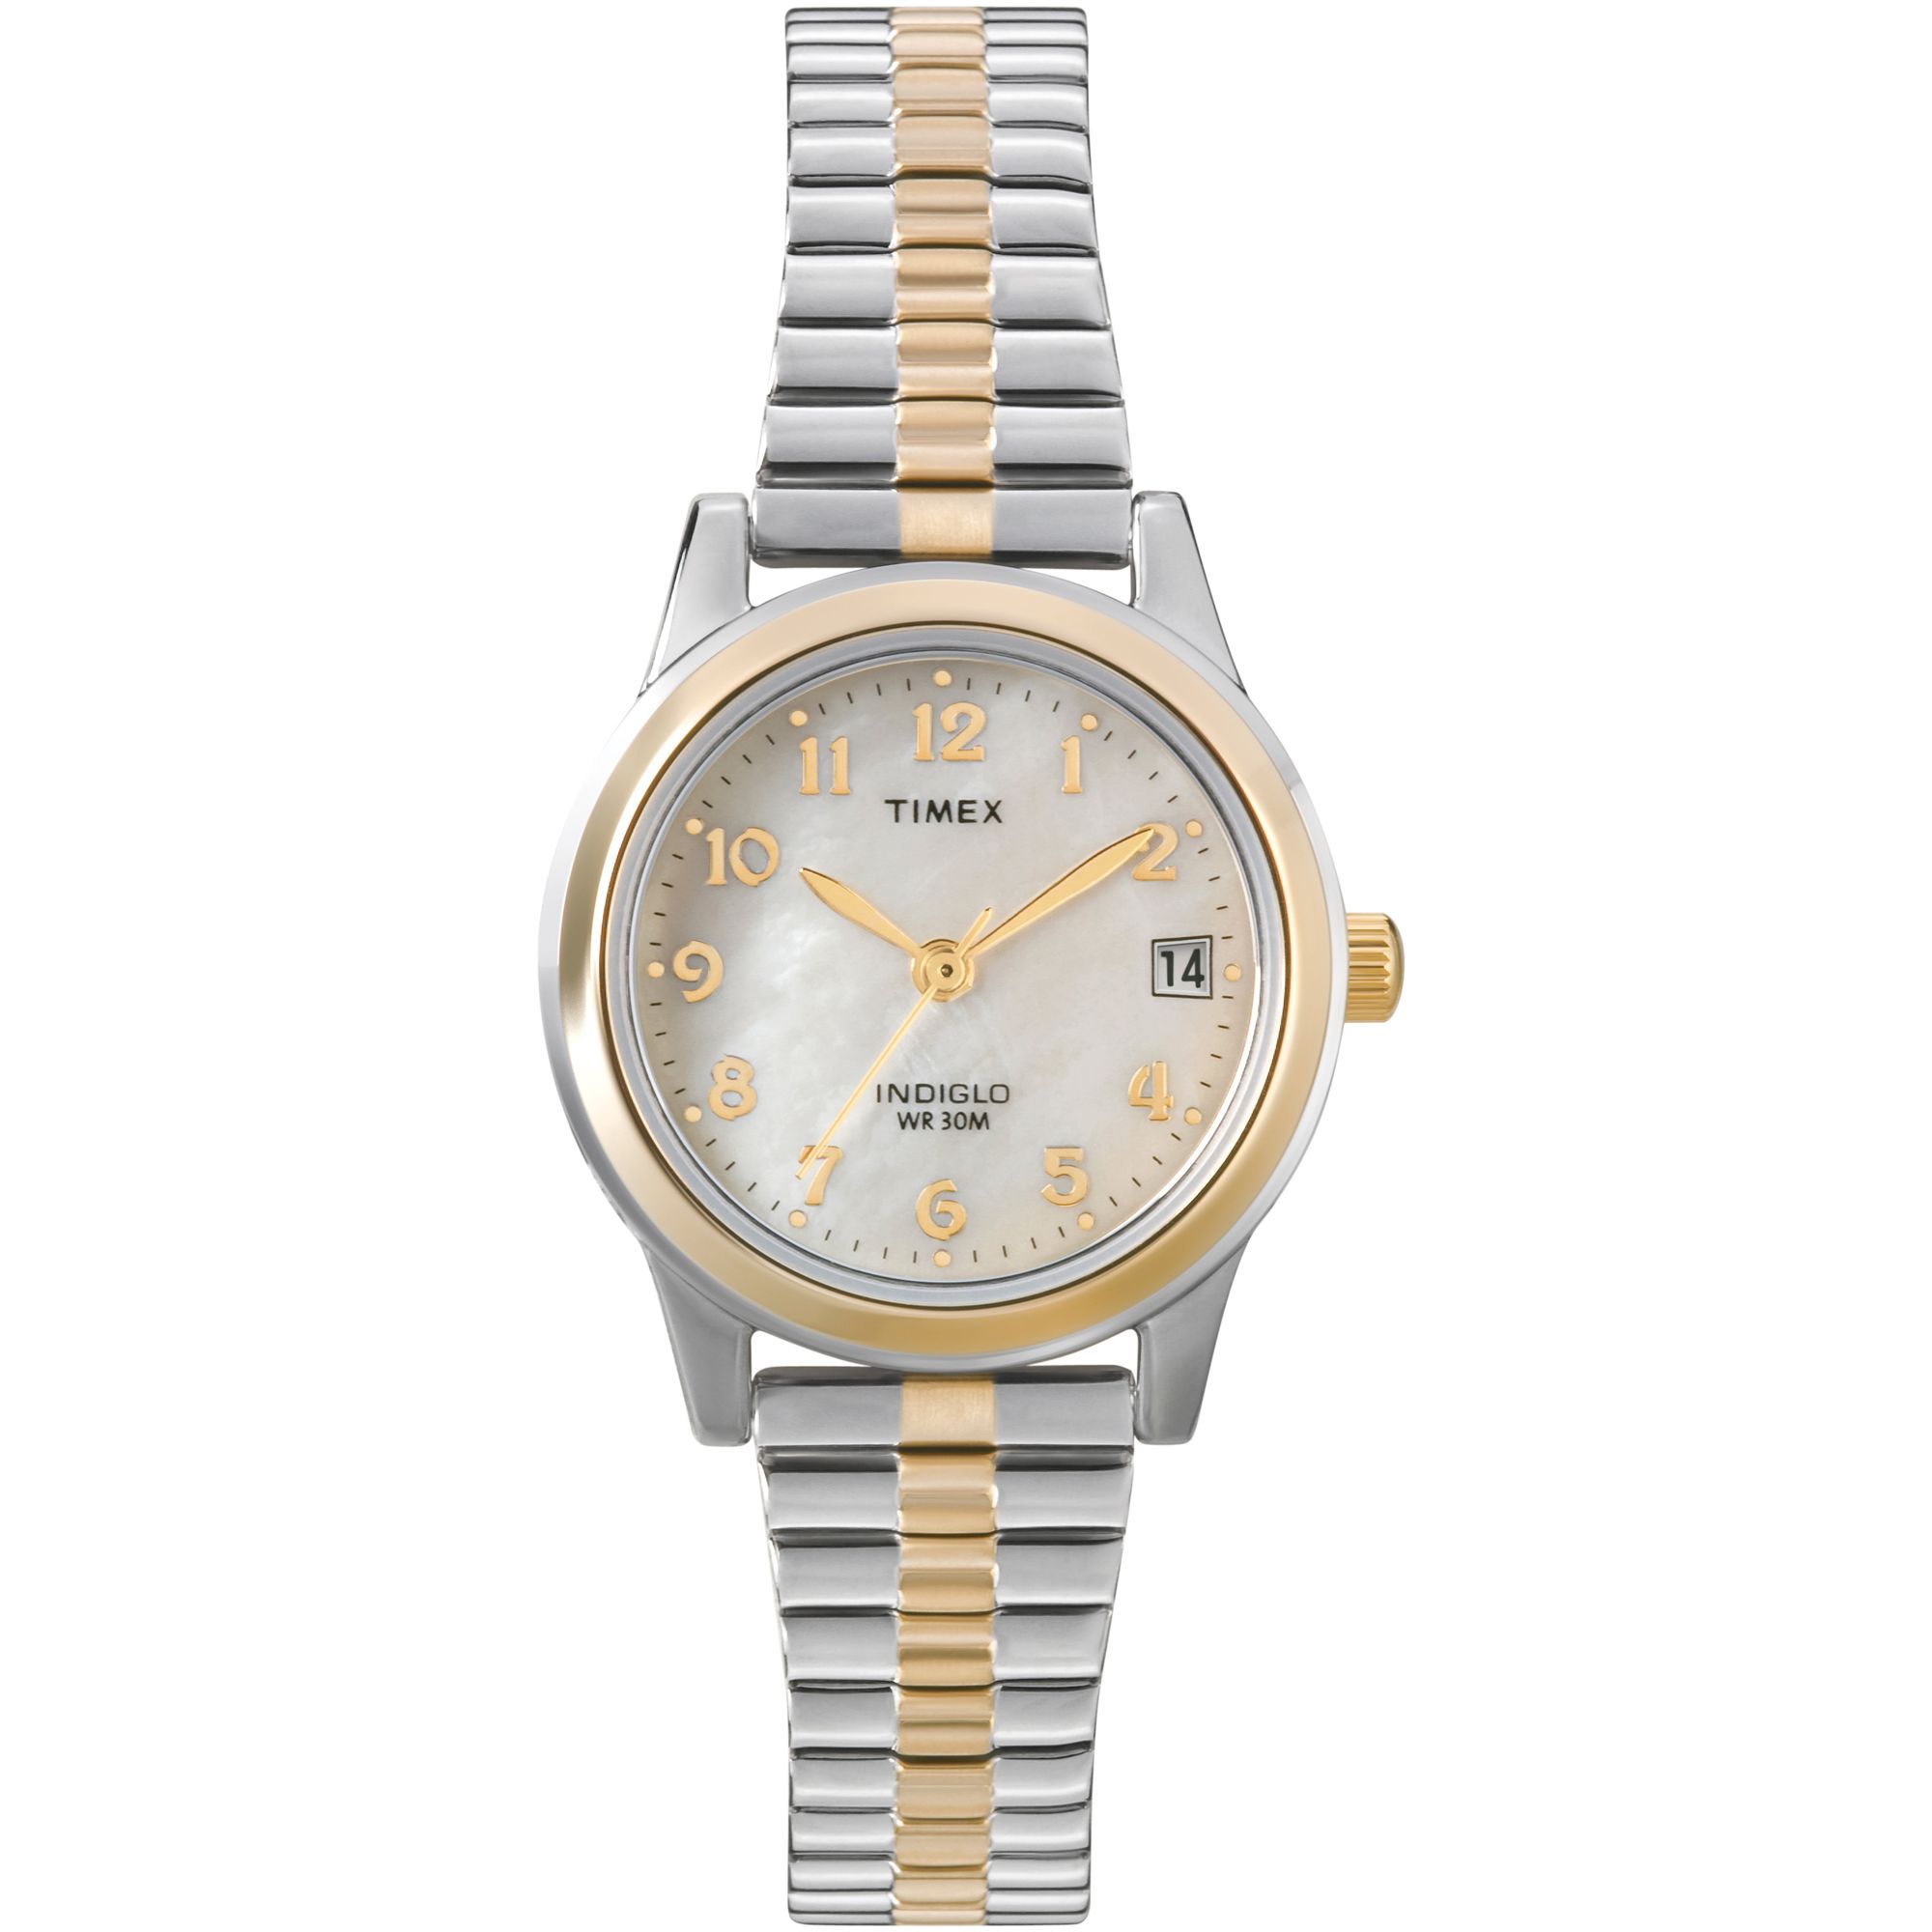 UPC 753048307005 product image for Timex Ladies Calendar Date Watch w/Round Case, White Dial & TT Expansion Band | upcitemdb.com